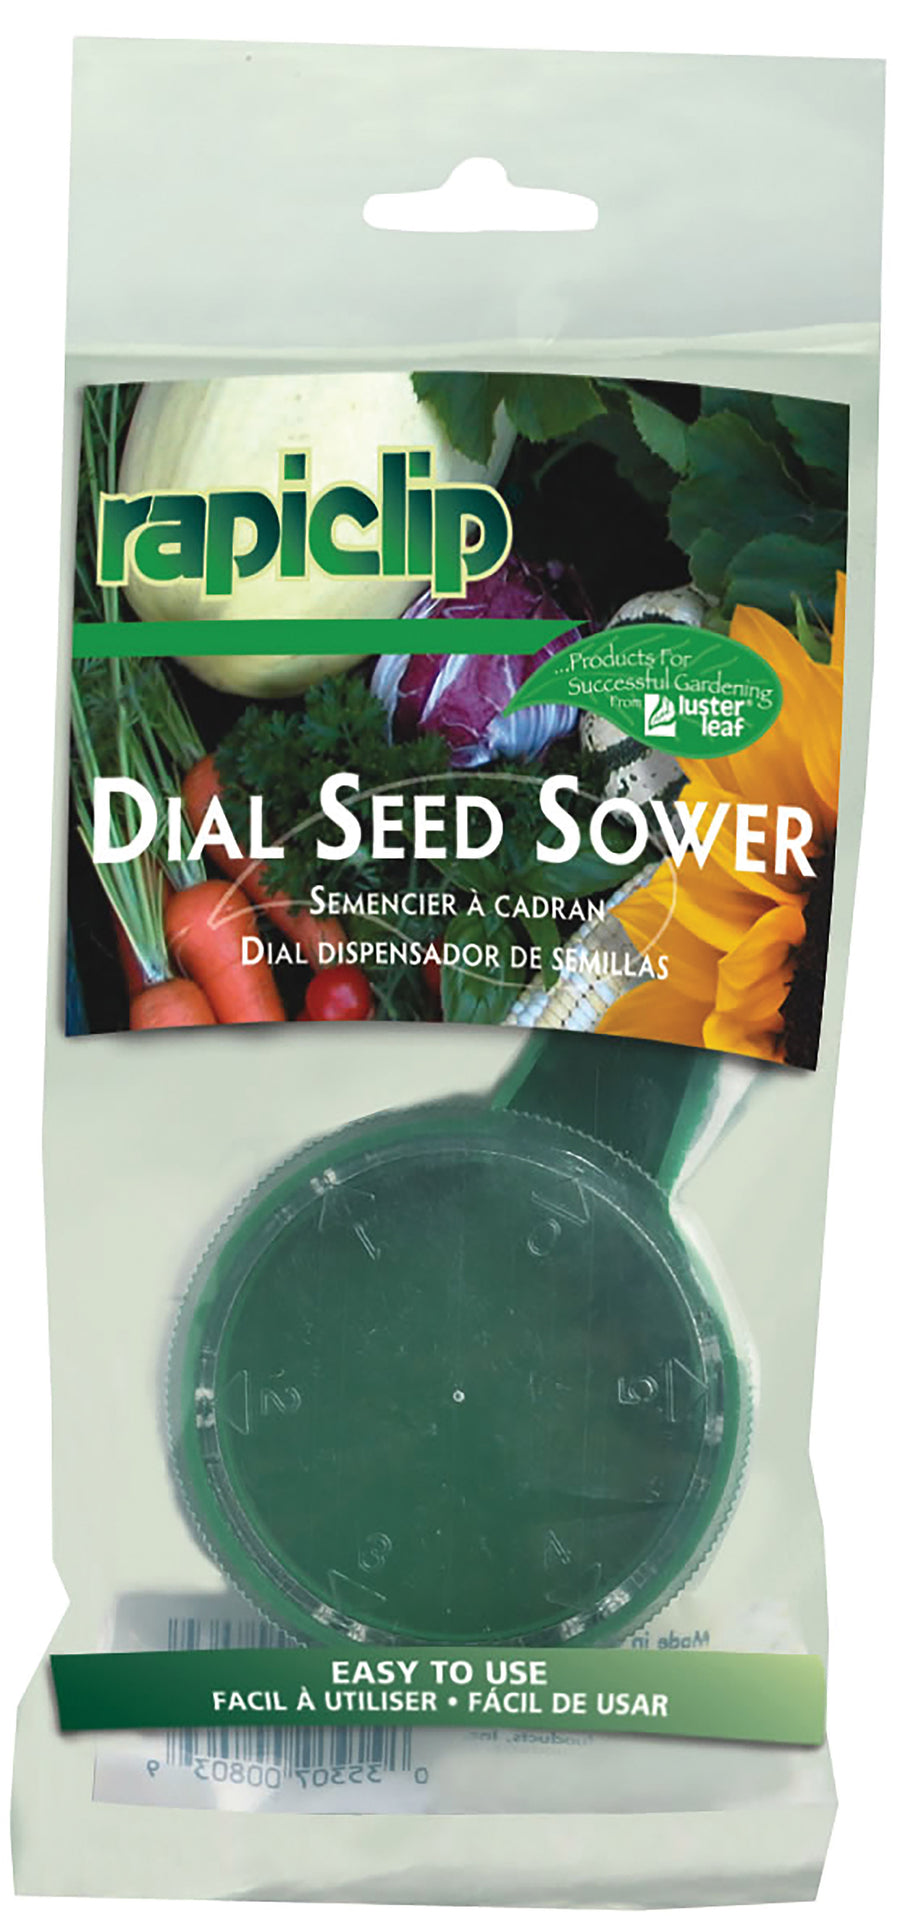 Dial Seed Sower